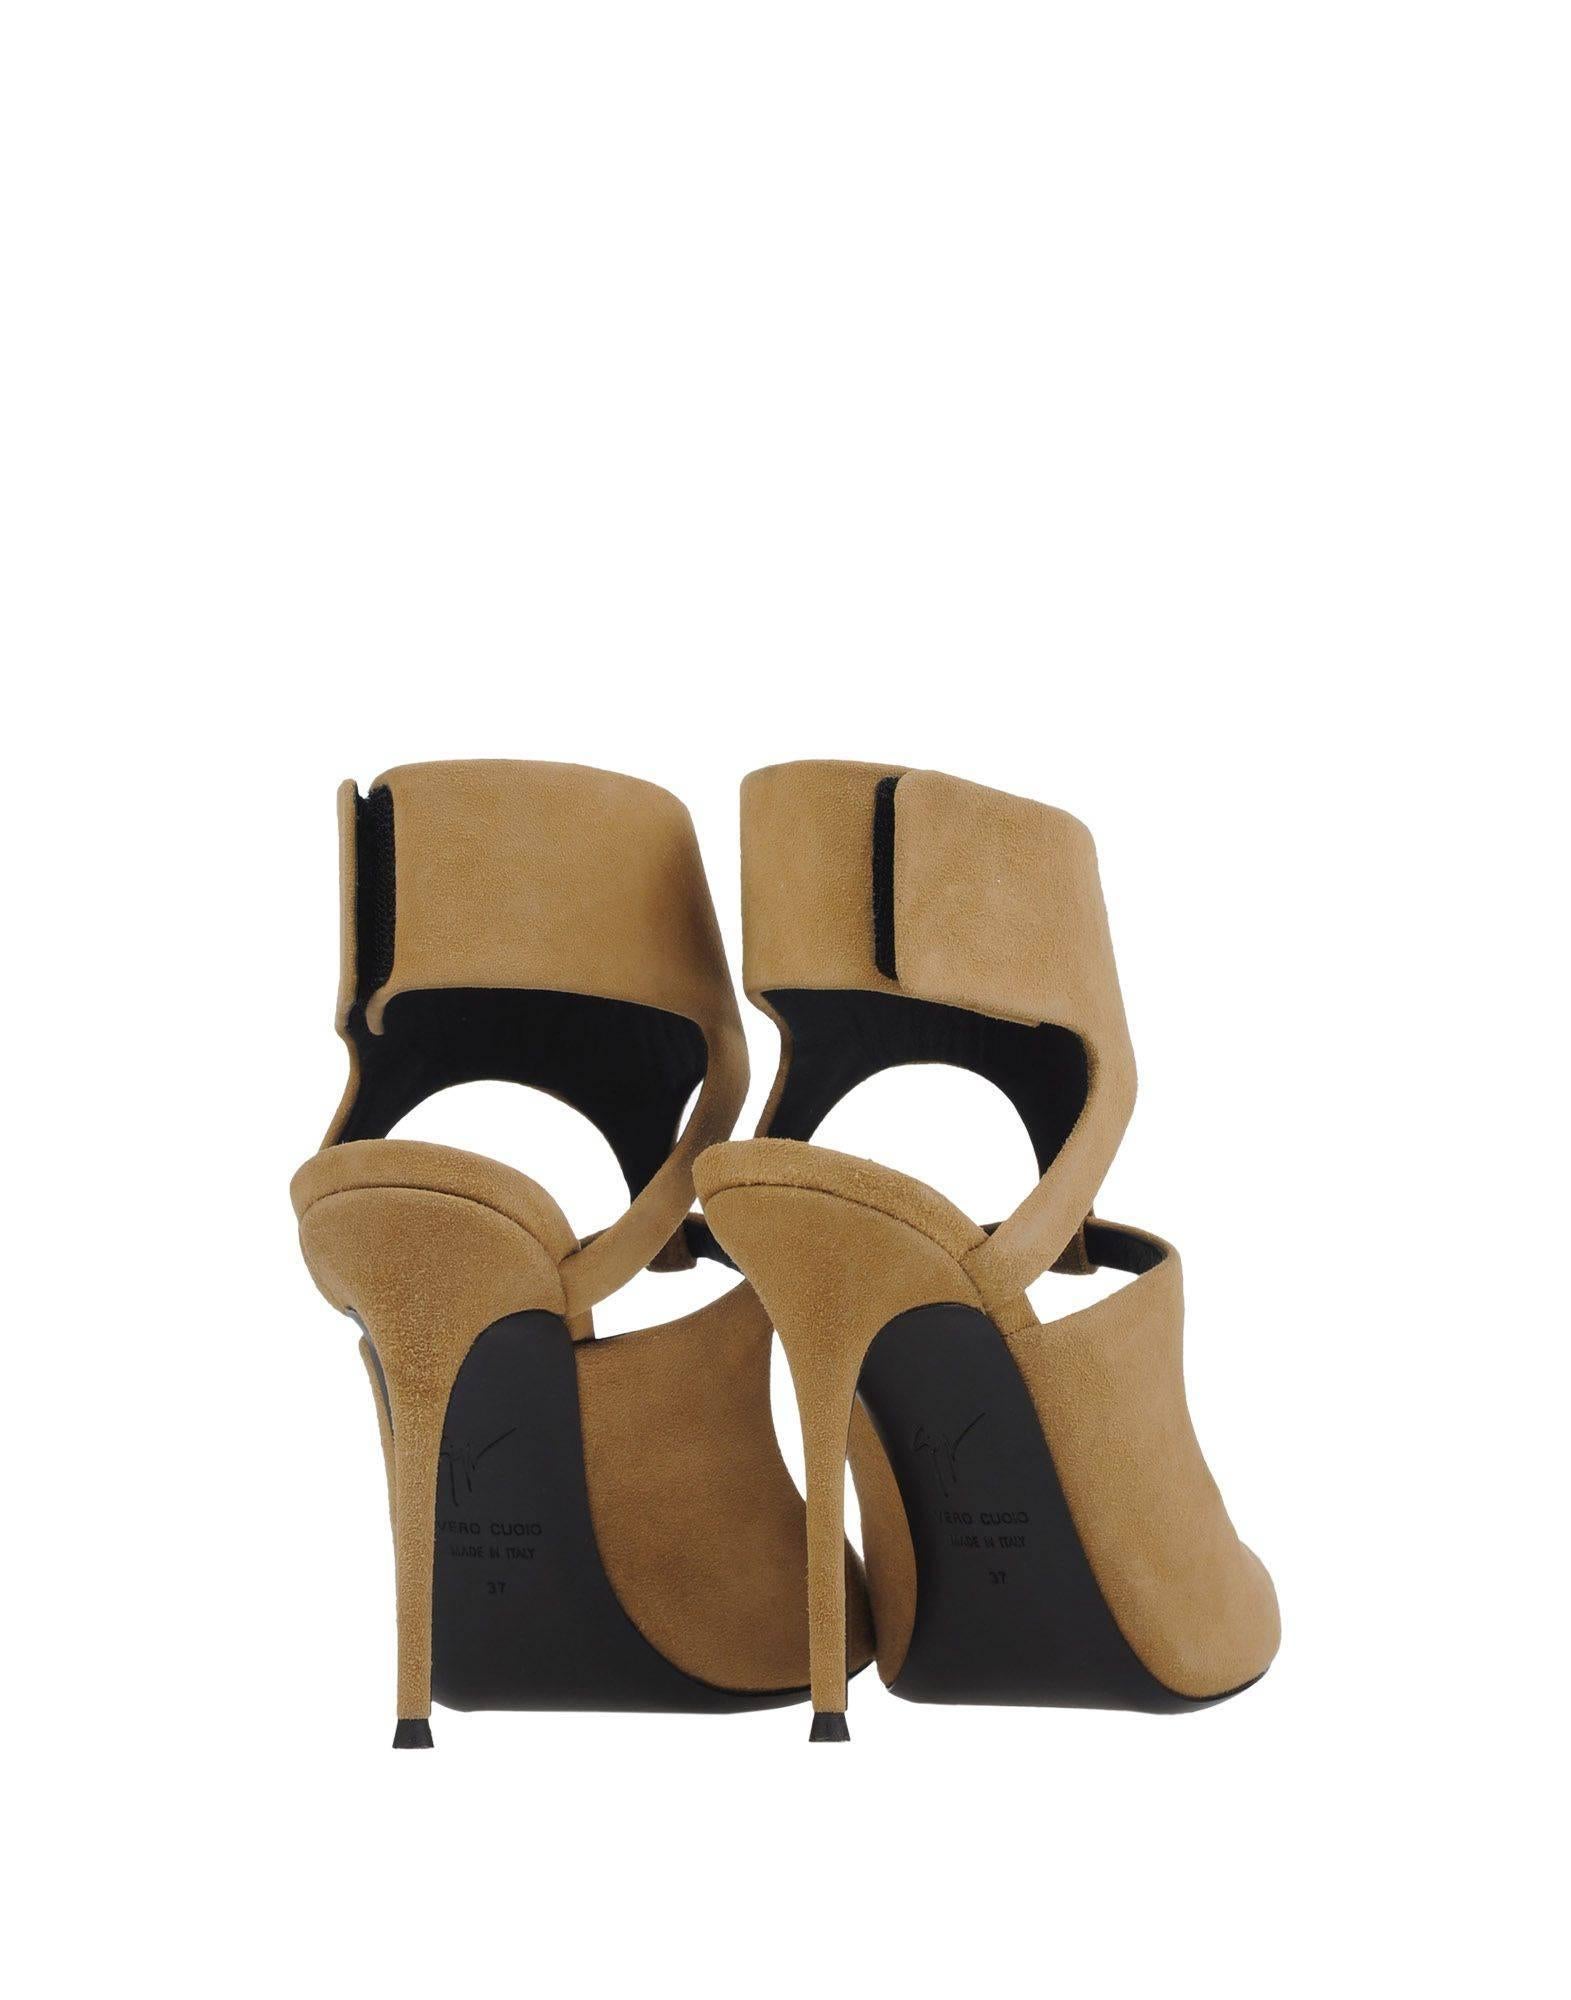 Giuseppe Zanotti New Tan Suede Cut Out Evening Sandals Heels in Box  In New Condition In Chicago, IL